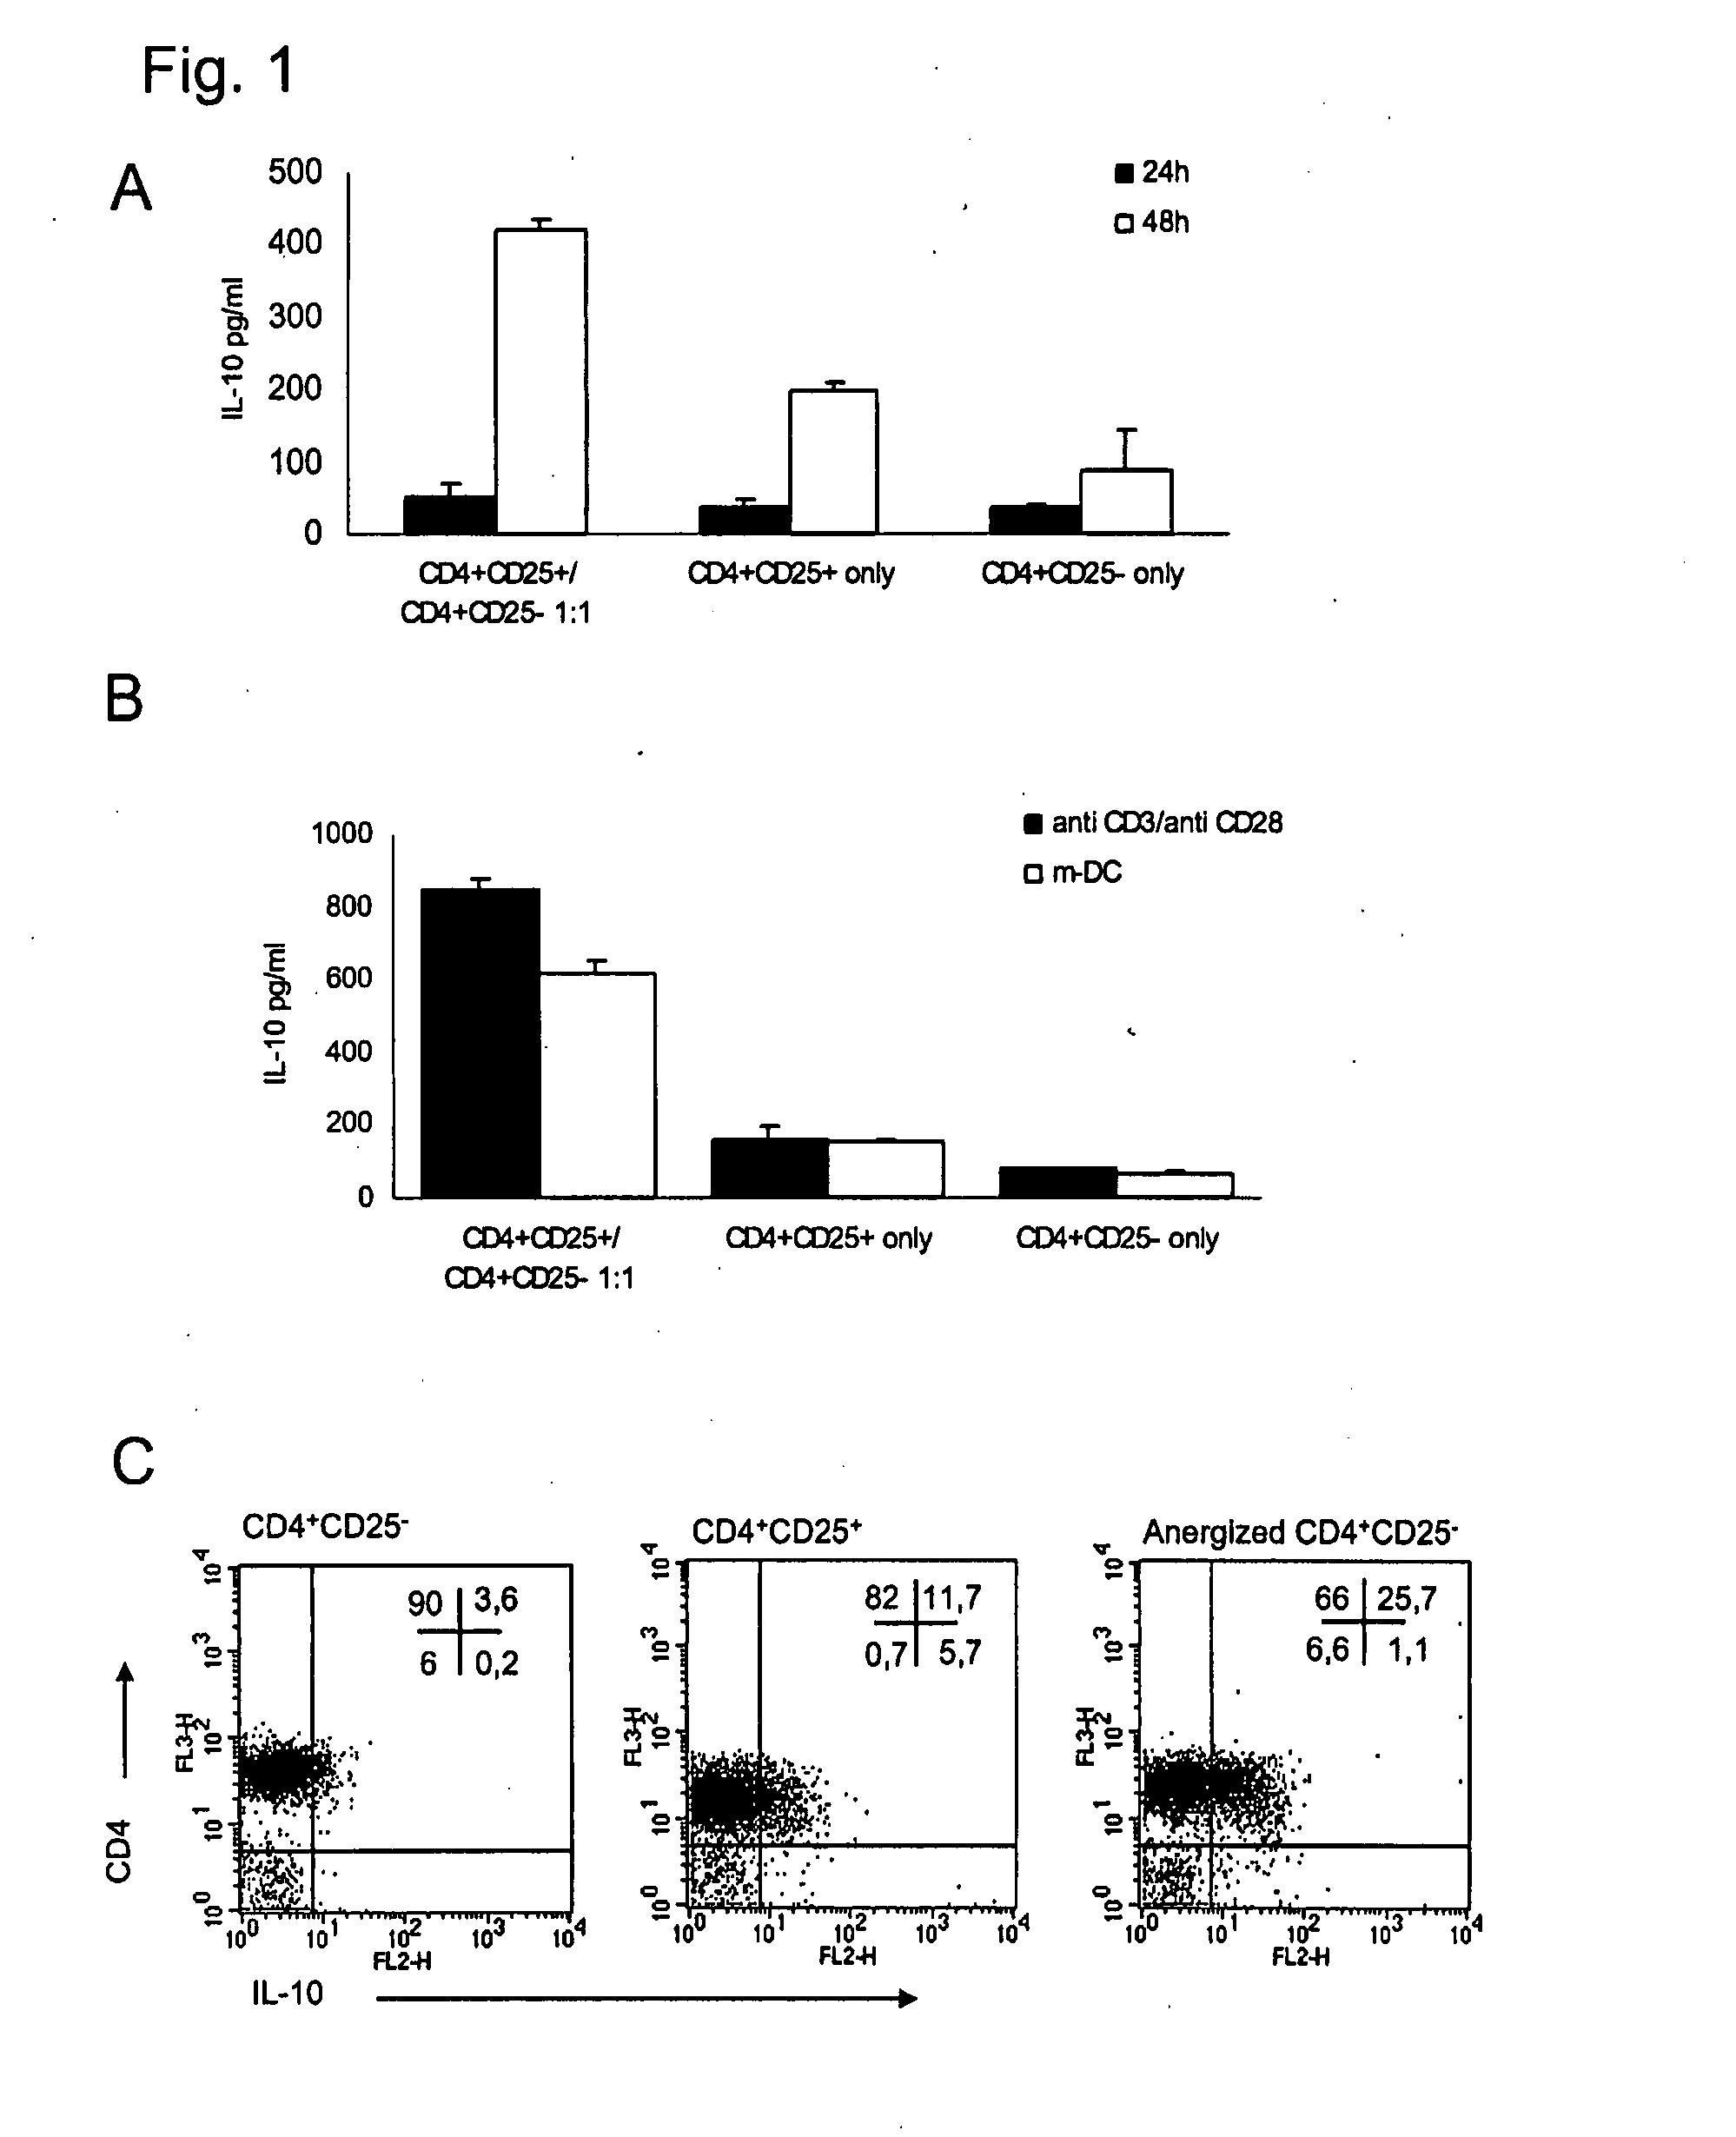 CD4+CD25- T CELLS AND Tr1-LIKE REGULATORY T CELLS